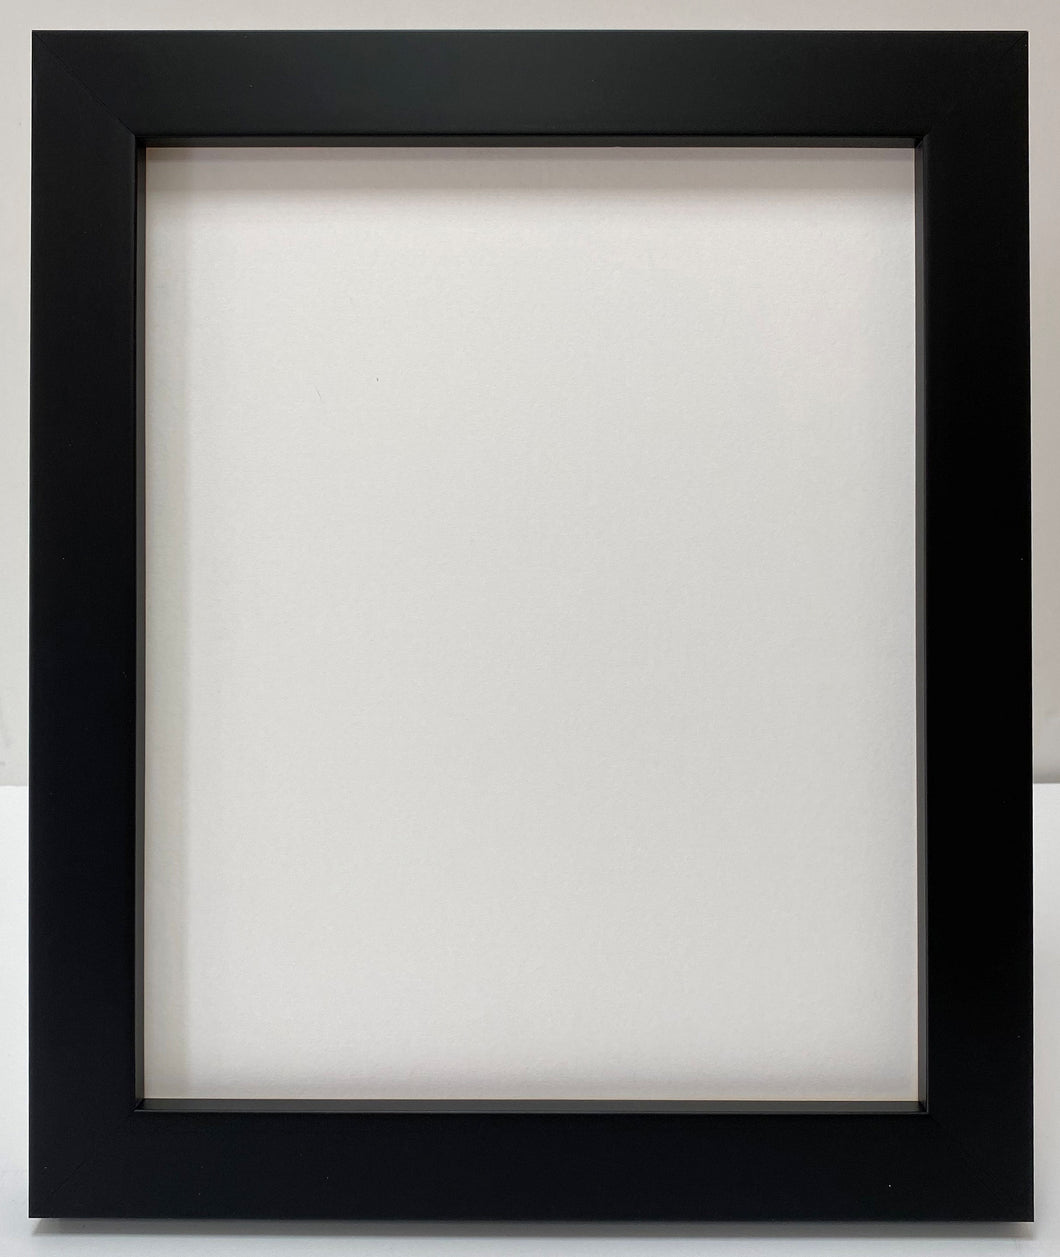 Black Box Wooden Picture Frame (33mm wide)